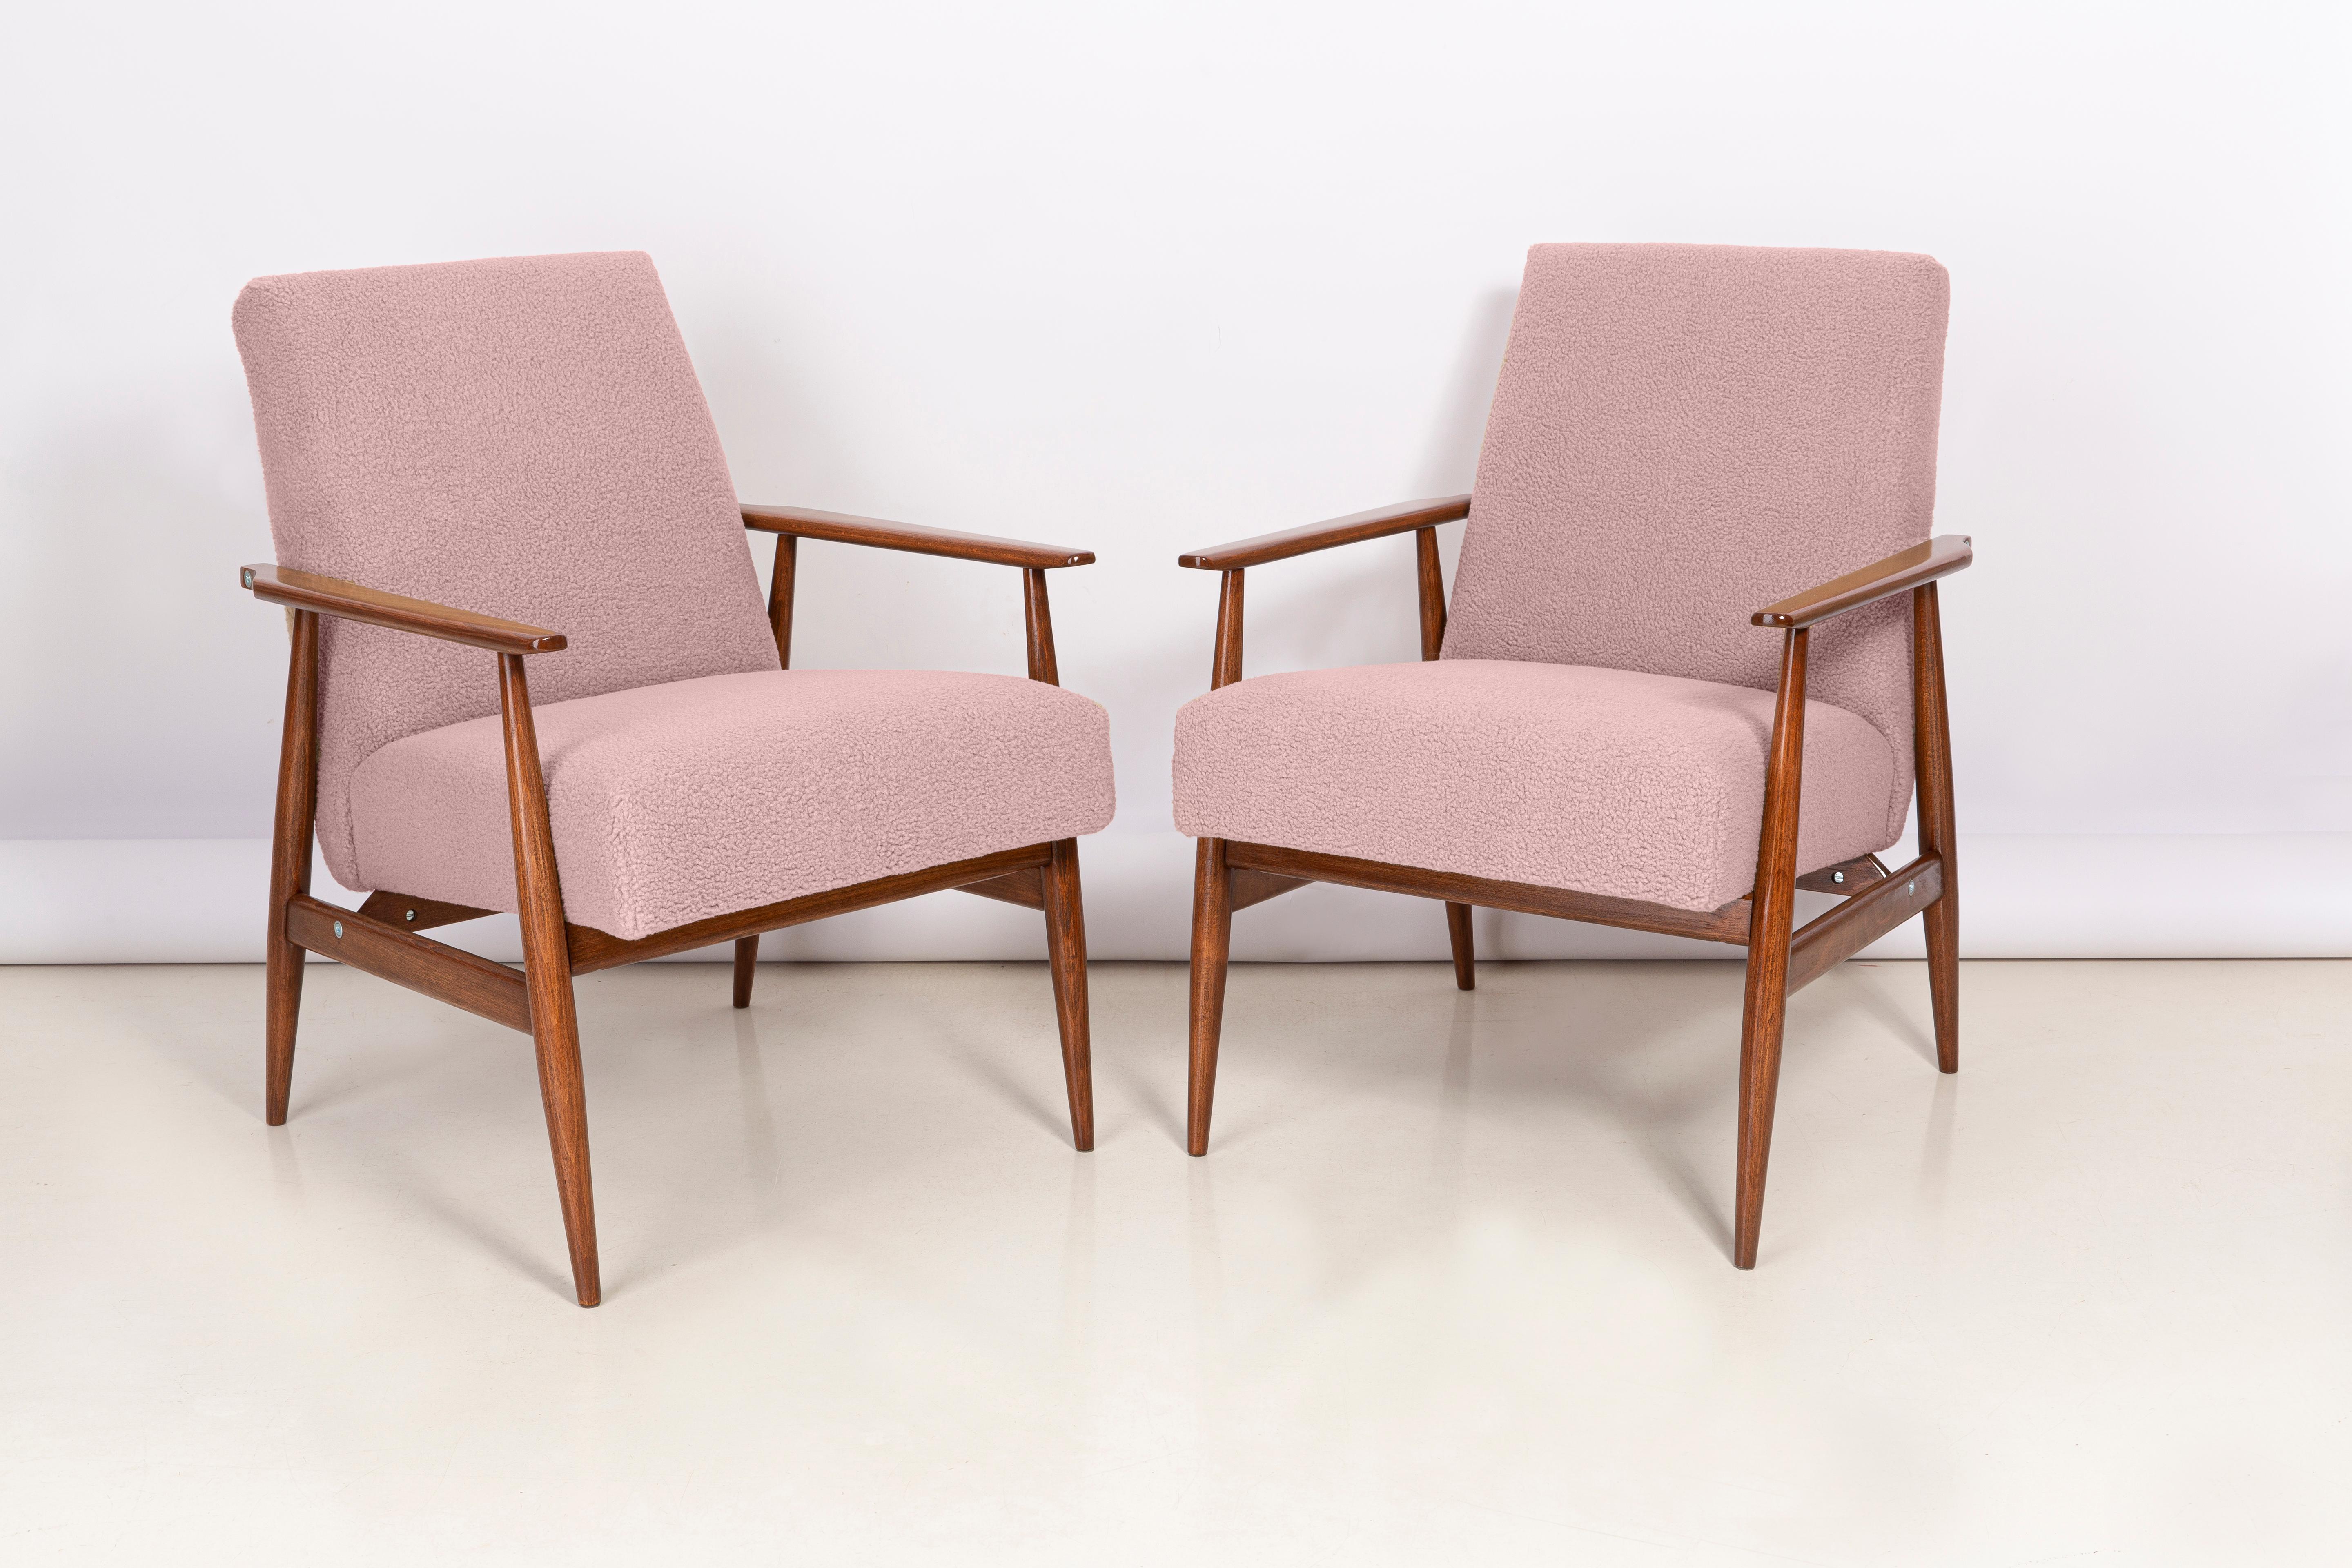 A pair of dusty pink bouclé armchairs, designed by Henryk Lis. Furniture after full carpentry and upholstery renovation. The armchairs will be perfect in Minimalist spaces, both private and public. 

Upholstery - faux fur has a structure